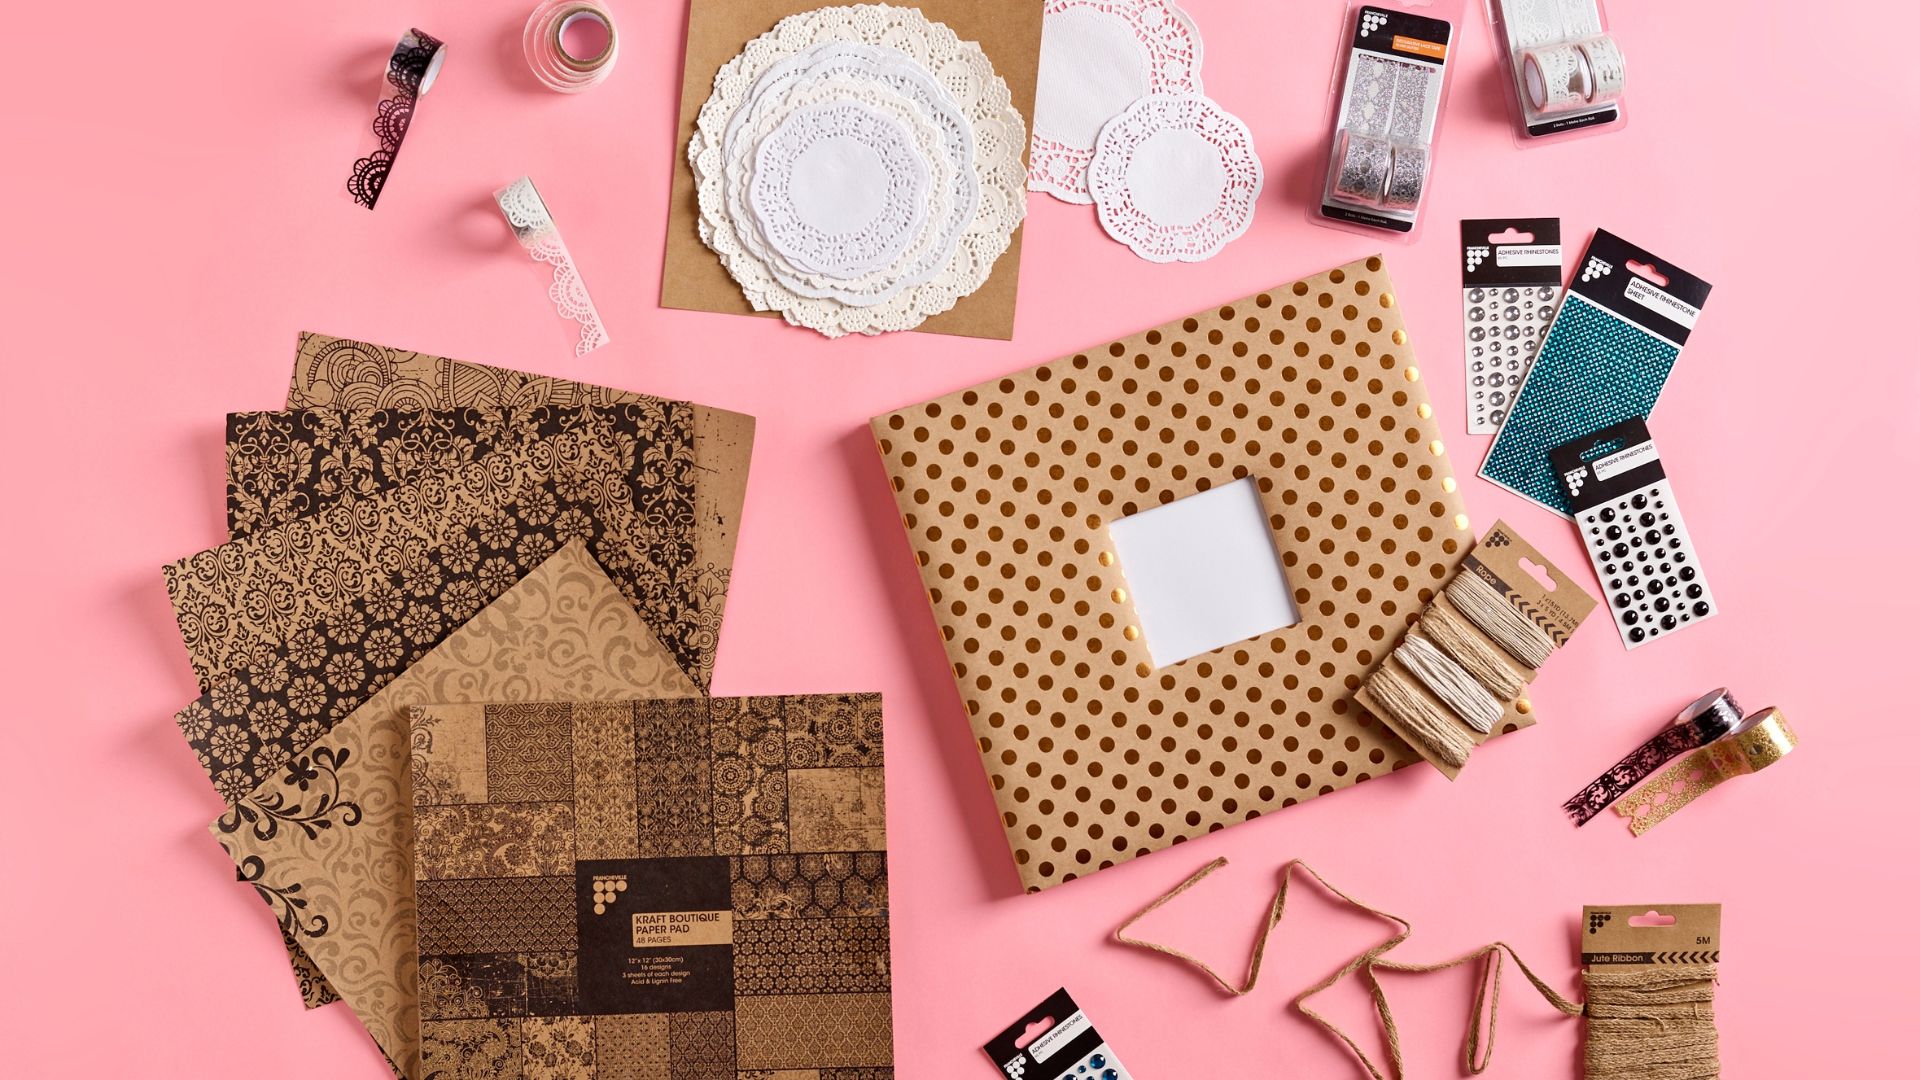 7 Beautiful Scrapbook Album ideas for you to try!